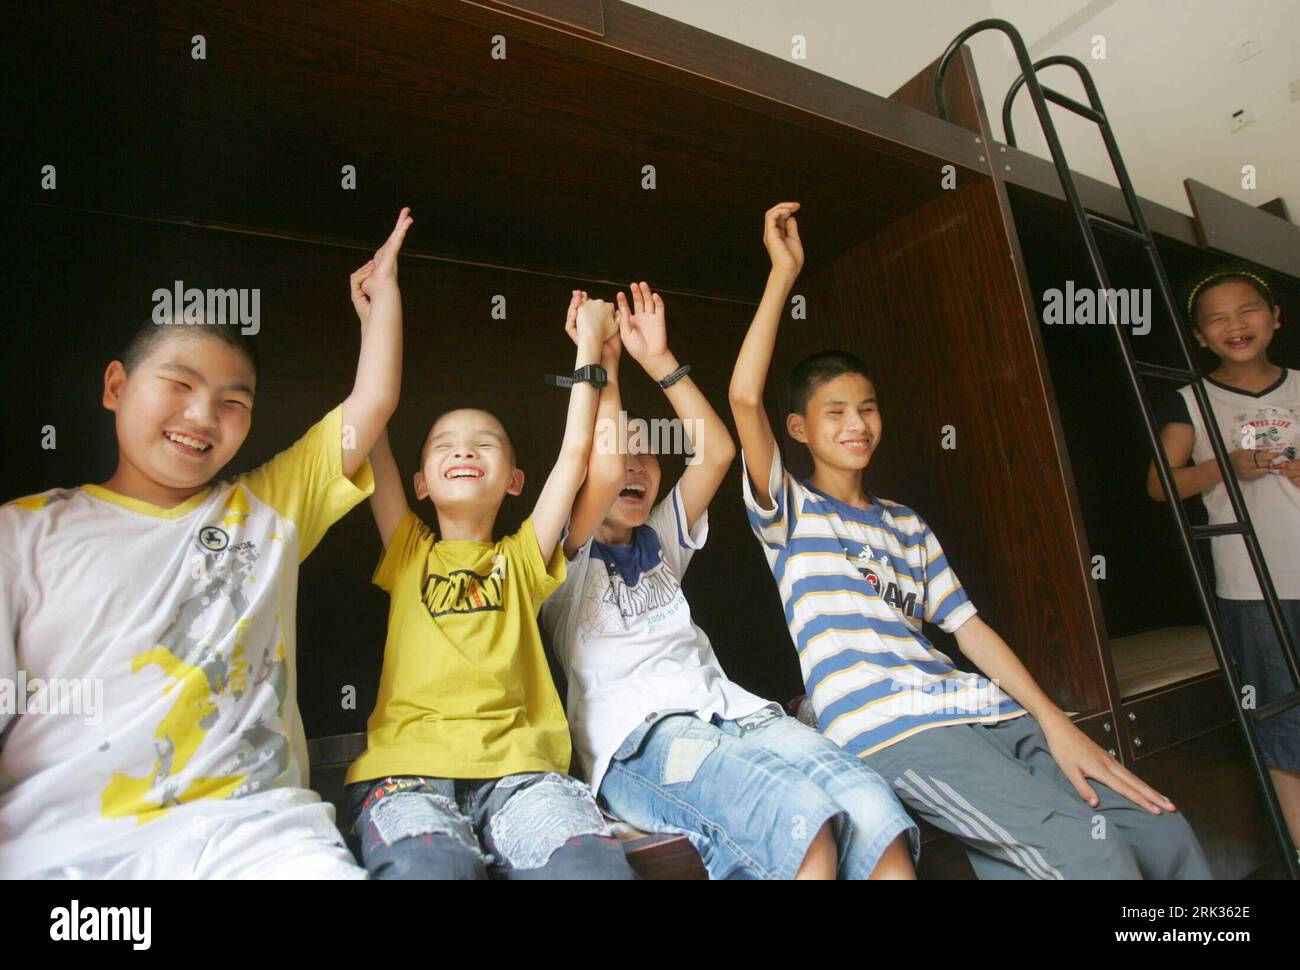 Bildnummer: 53330744  Datum: 08.09.2009  Copyright: imago/Xinhua WENZHOU, Sept 8, 2009 (Xinhua) -- Some sight-impaired students cheer for the new school in a dorm of the new Wenzhou Special School in Wenzhou City of east China s Zhejiang Province. Wenzhou Special School welcomed the first batch of sixty students from the former Wenzhou School for the Sight-impaired on Monday. Located in Yongjia County of Wenzhou, the newly built Wenzhou Special School covers an area of about 11 hectares and receives the sight-impaired, hearing-impaired and mentally-retarded children for 15-year schooling. (Xin Stock Photo